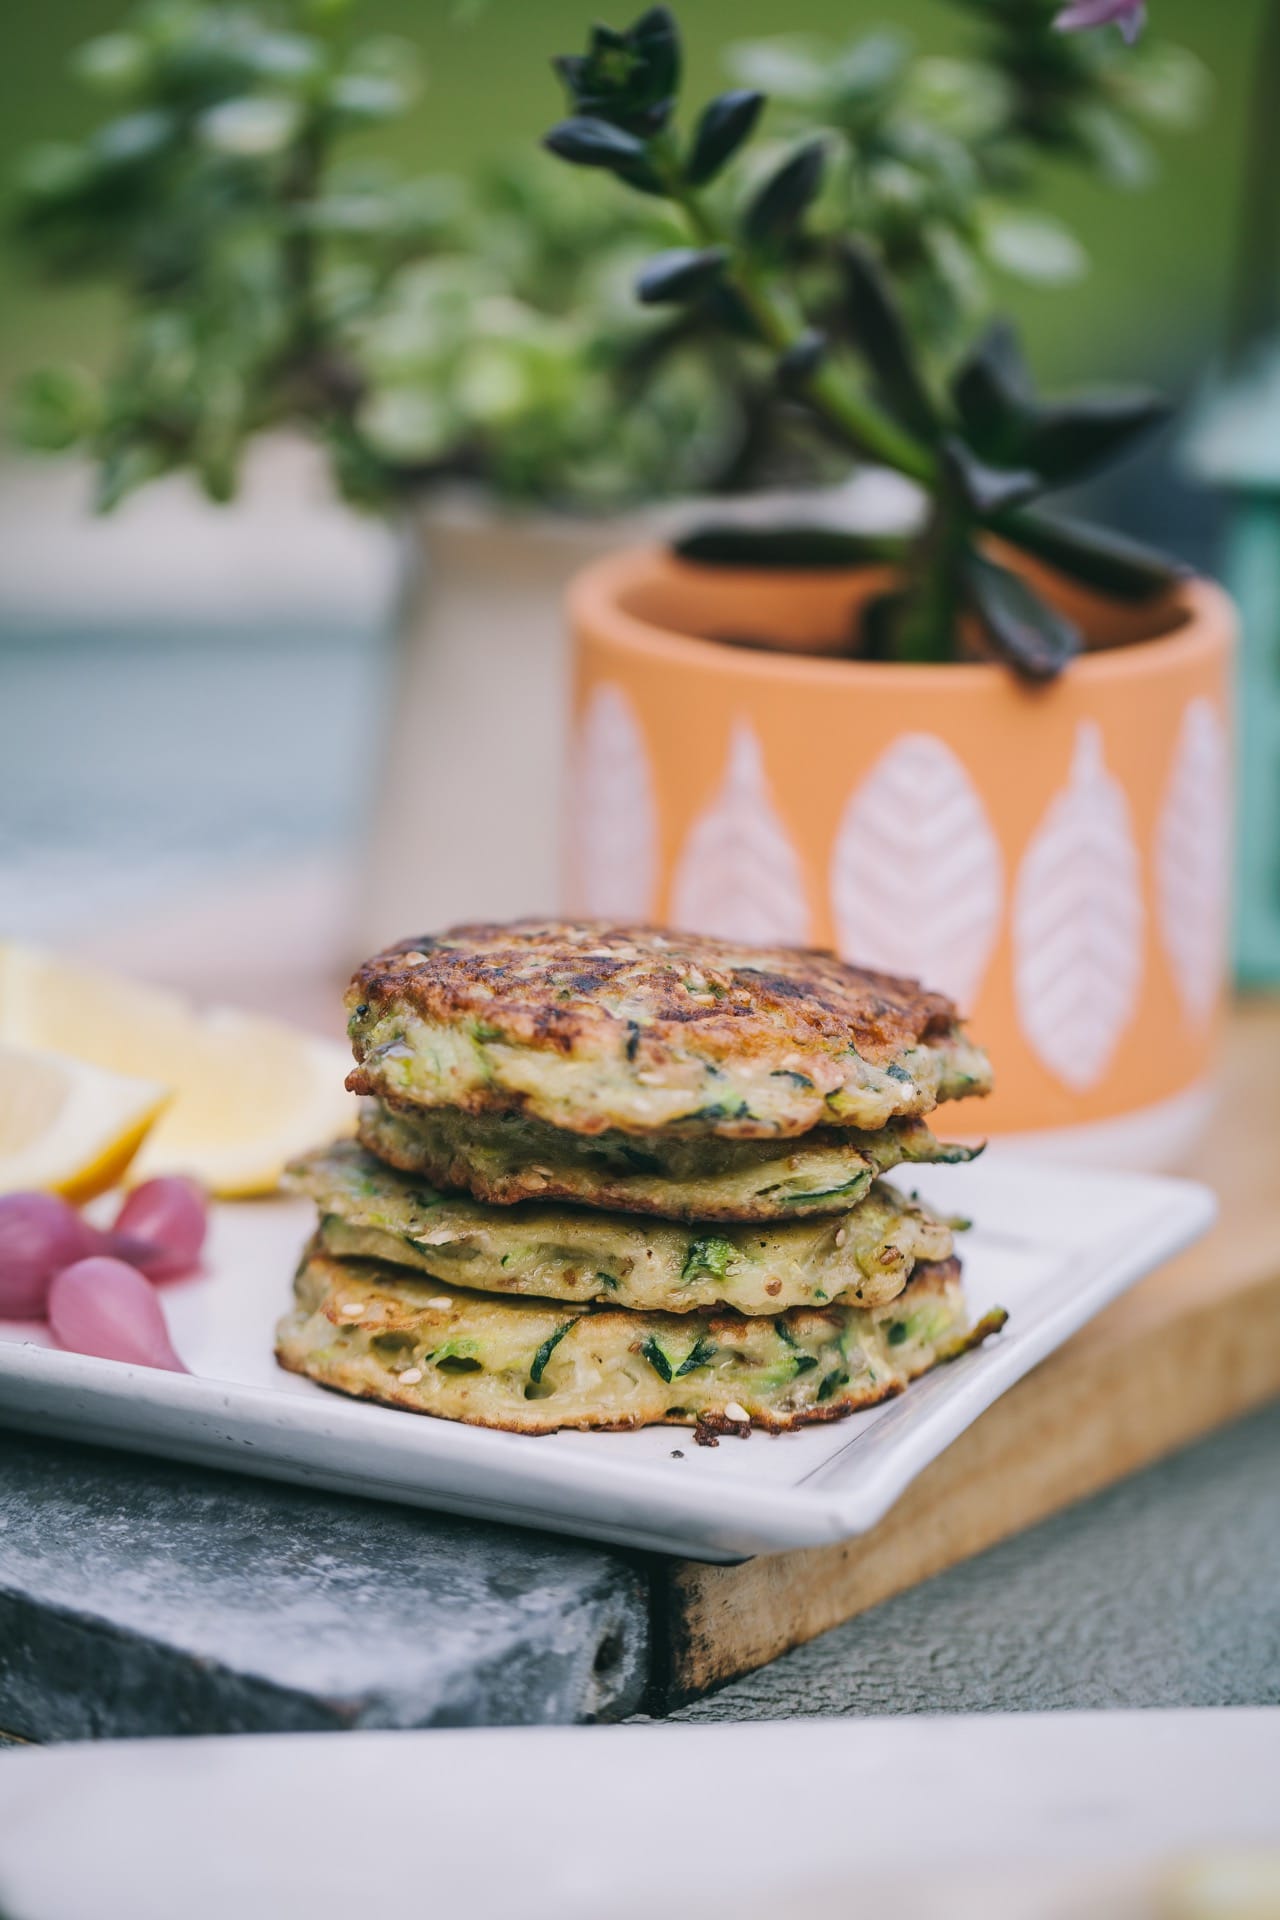 Zucchini Fritters | Playful Cooking #zucchini #fritters #snack #healthy #vegetarian 